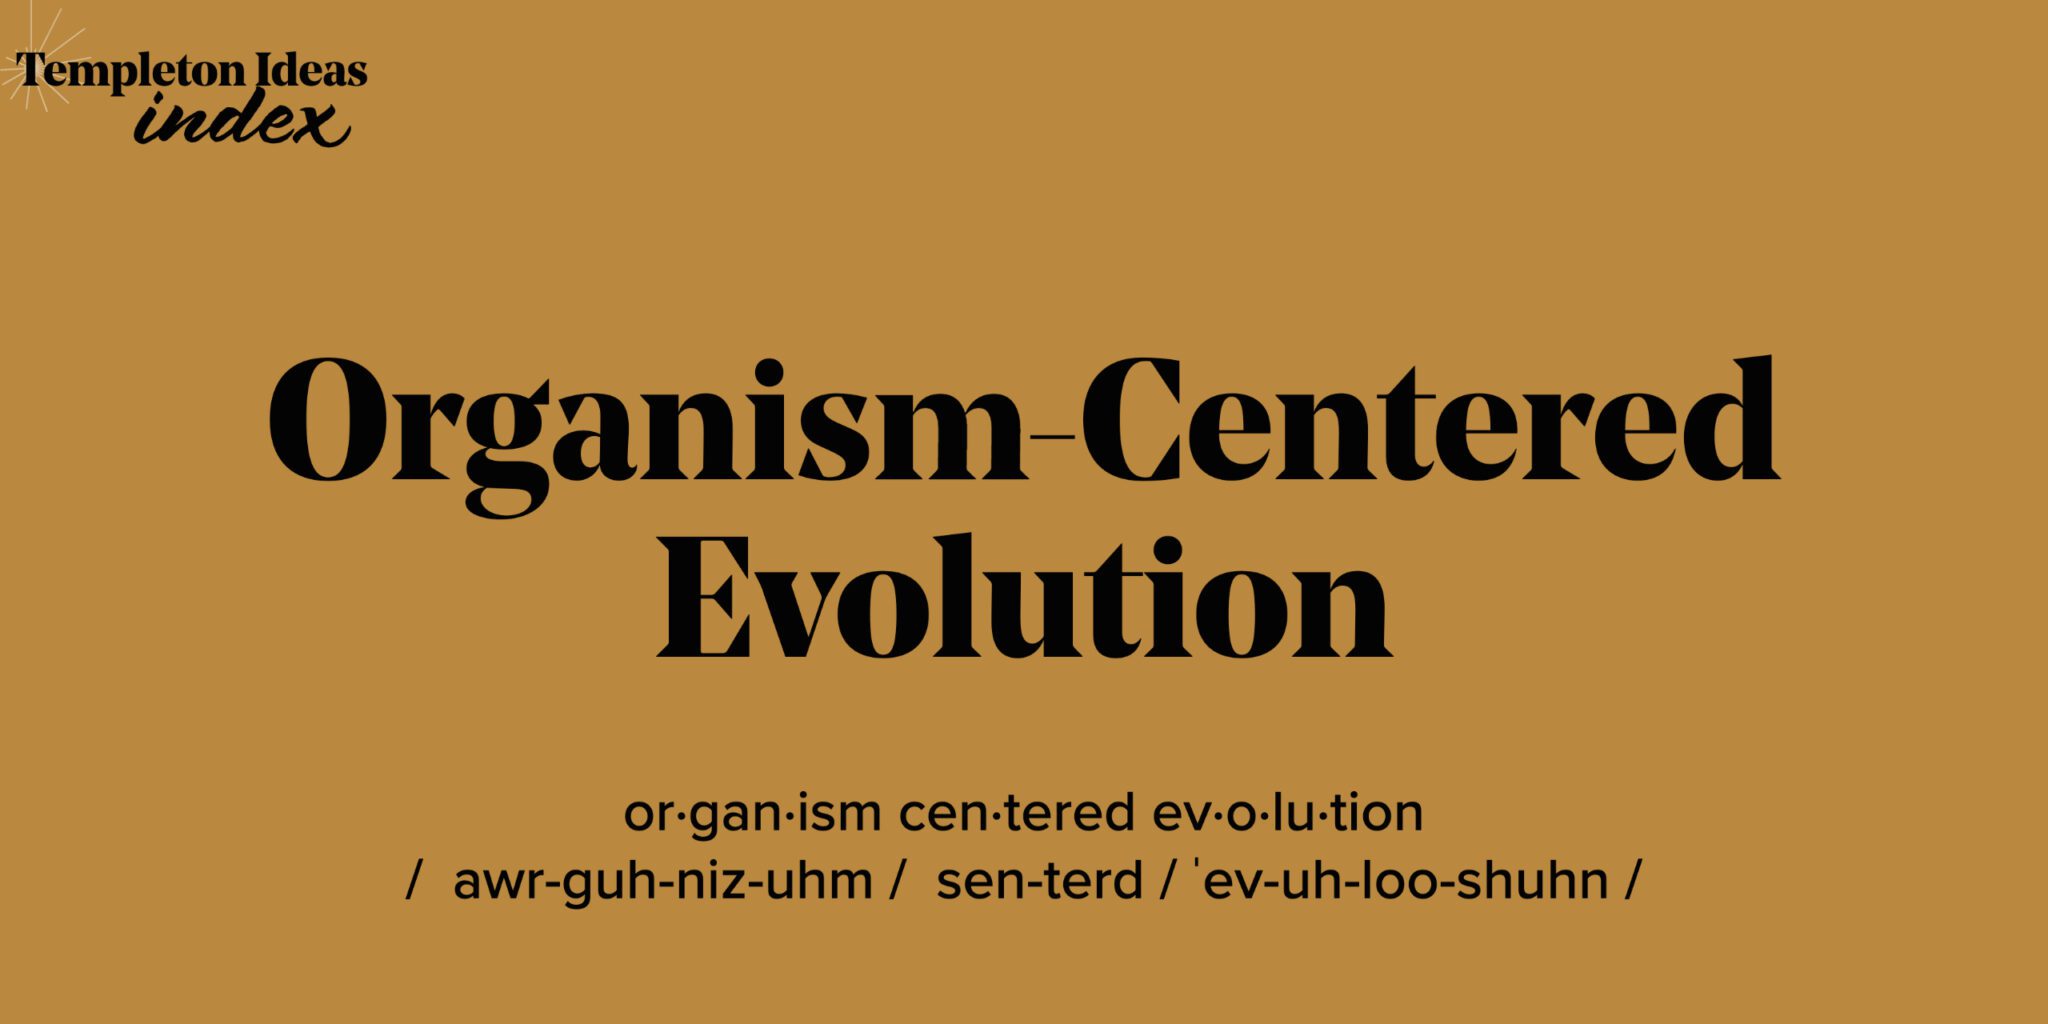 What Is Organism-Centered Evolution?